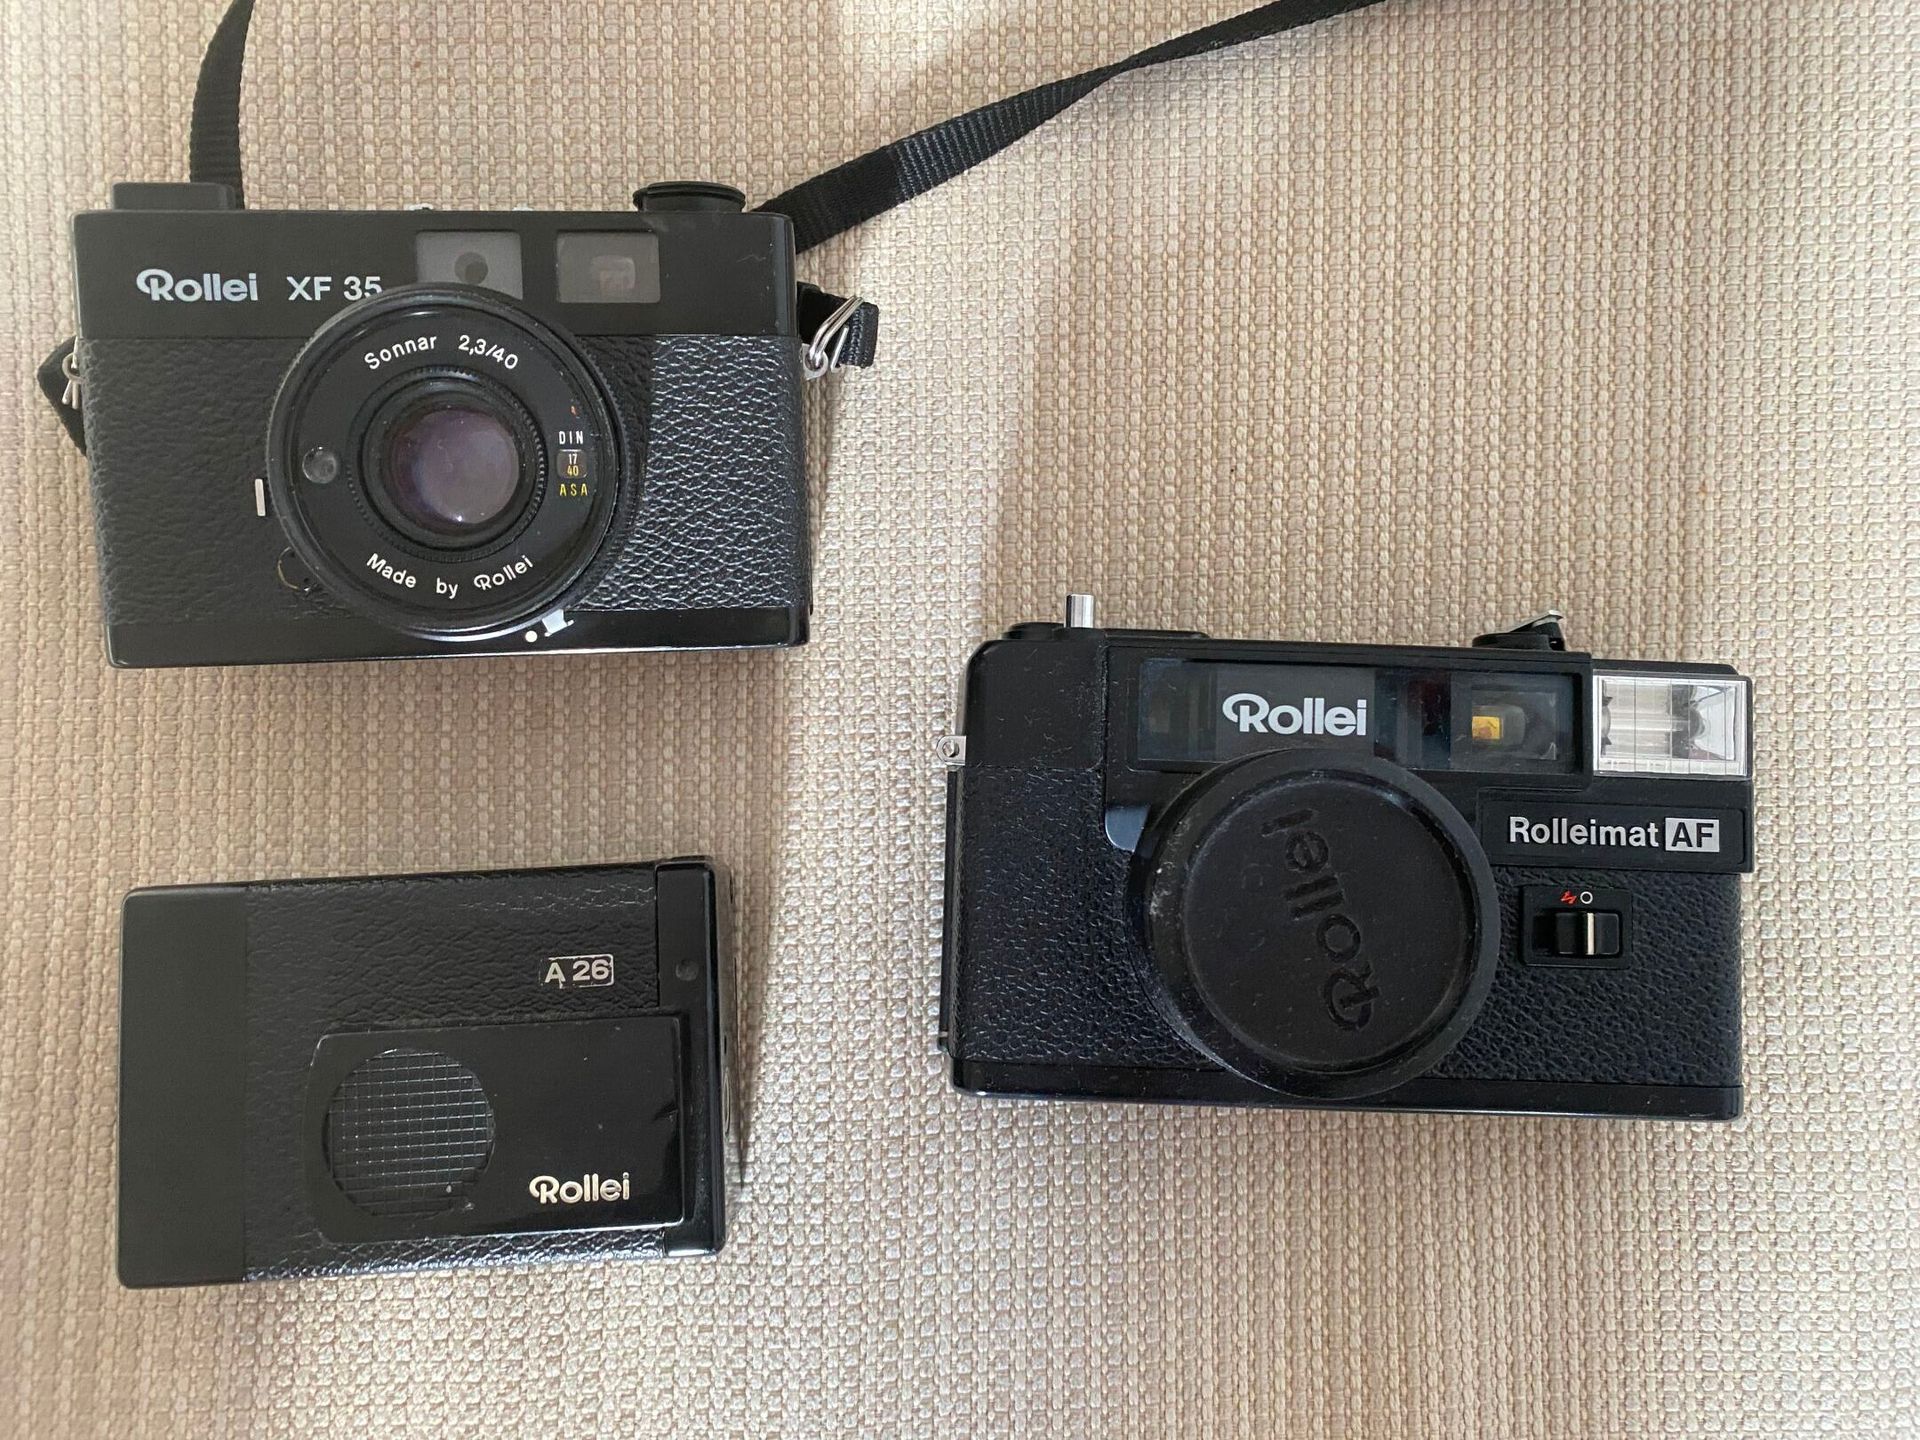 ROLLEI 3 appareils photos anciens 一批旧相机，包括 ： 
罗莱 XF35
罗莱 Roleilmat AF
ROLLEI A 2&hellip;